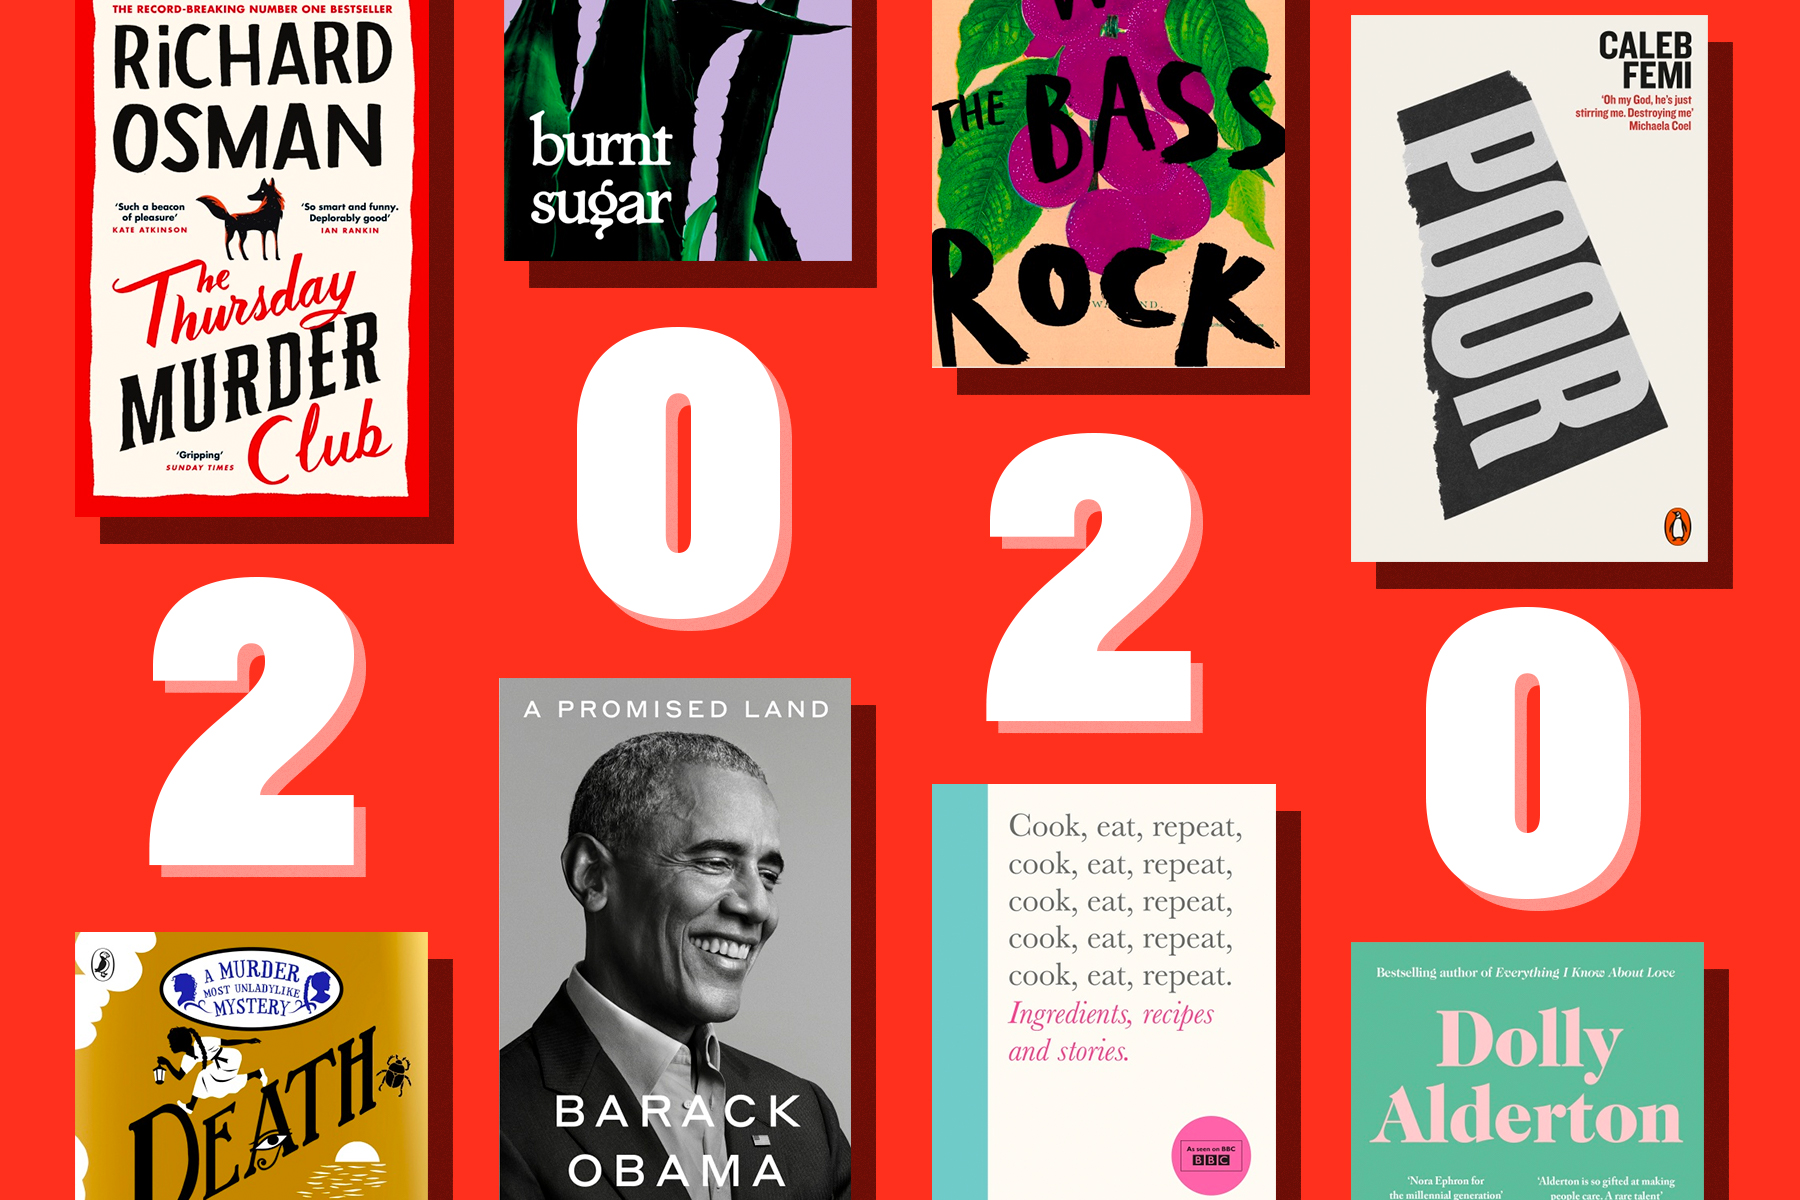 Collage of books out in 2020, including Richard Osman's The Thursday Murder Club, Robin Stevens' Death Sets Sail, Avni Doshi's Burnt Sugar, Barack Obama's A Promised Land, Evie Wyld's The Bass Rock, Nigella Lawson's Cook, Eat, Repeat, Caleb Femi's Poor and Dolly Alderton's Ghosts, on a read background in two rows, with 2020 in white letters in the middle of the rows.